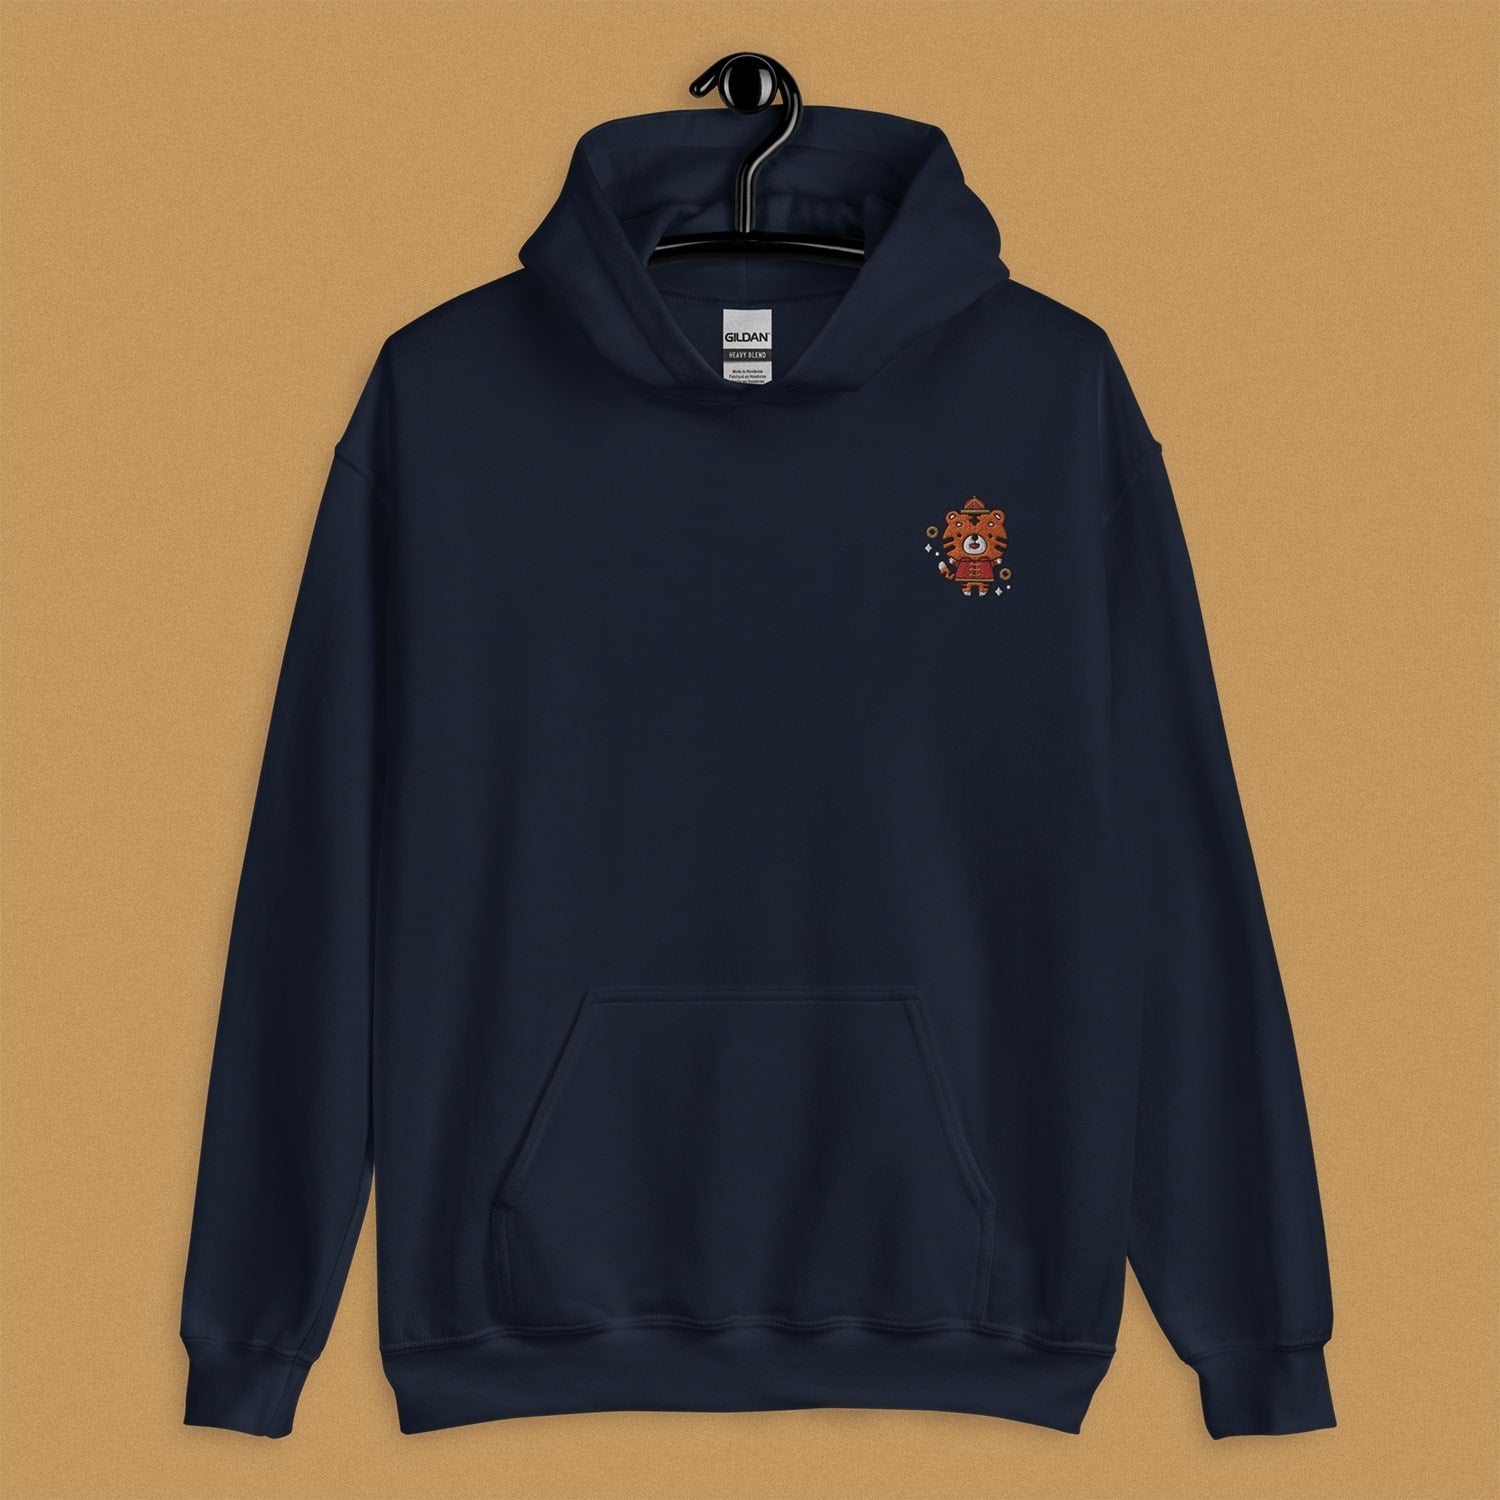 Wheat Tiger made from 100% light of good taste shirt, hoodie